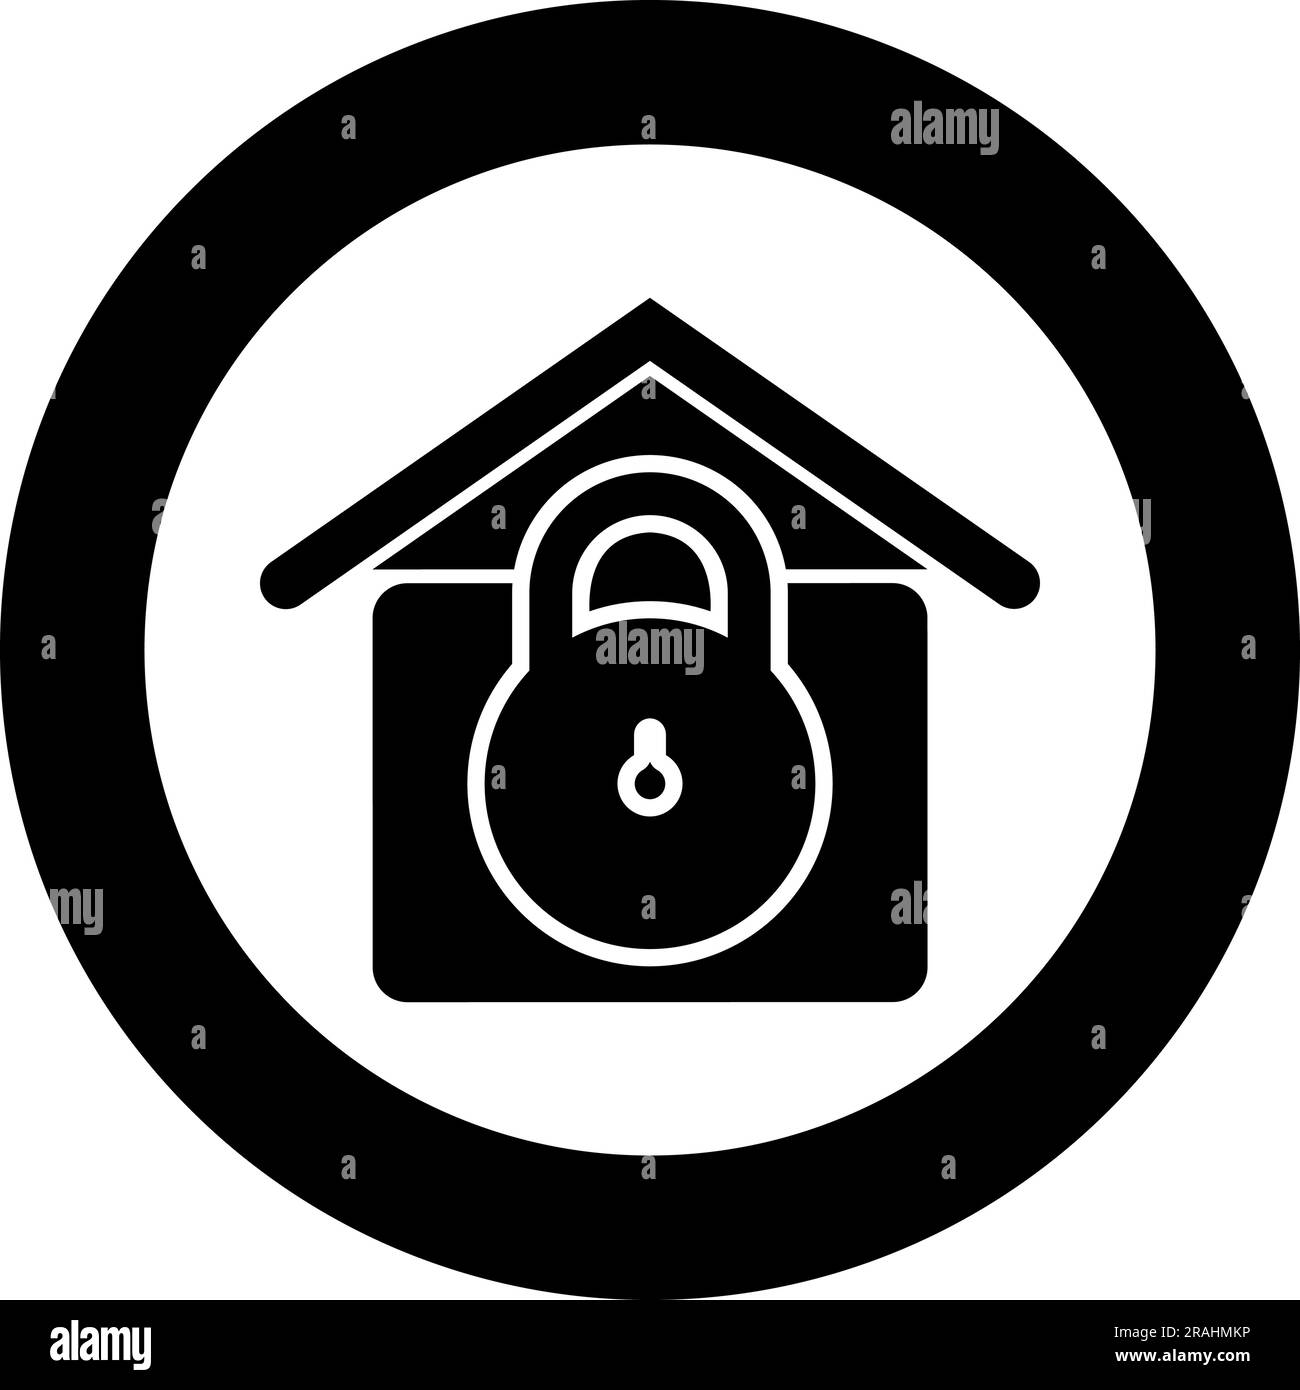 Lock house home protection with locked padlock concept safety defense security icon in circle round black color vector illustration image solid Stock Vector